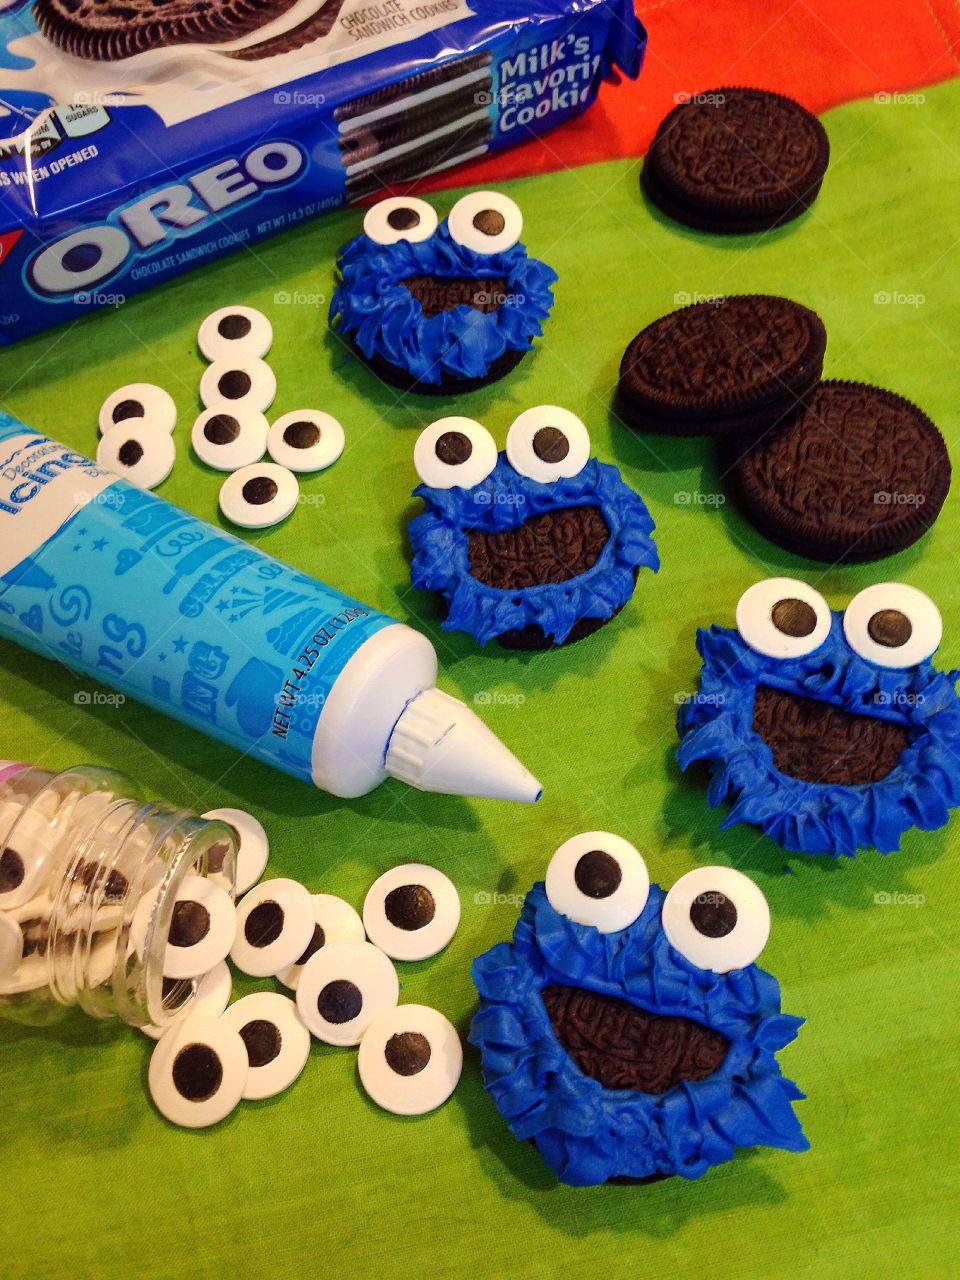 Having fun decorating Oreo Cookies with the kids. 